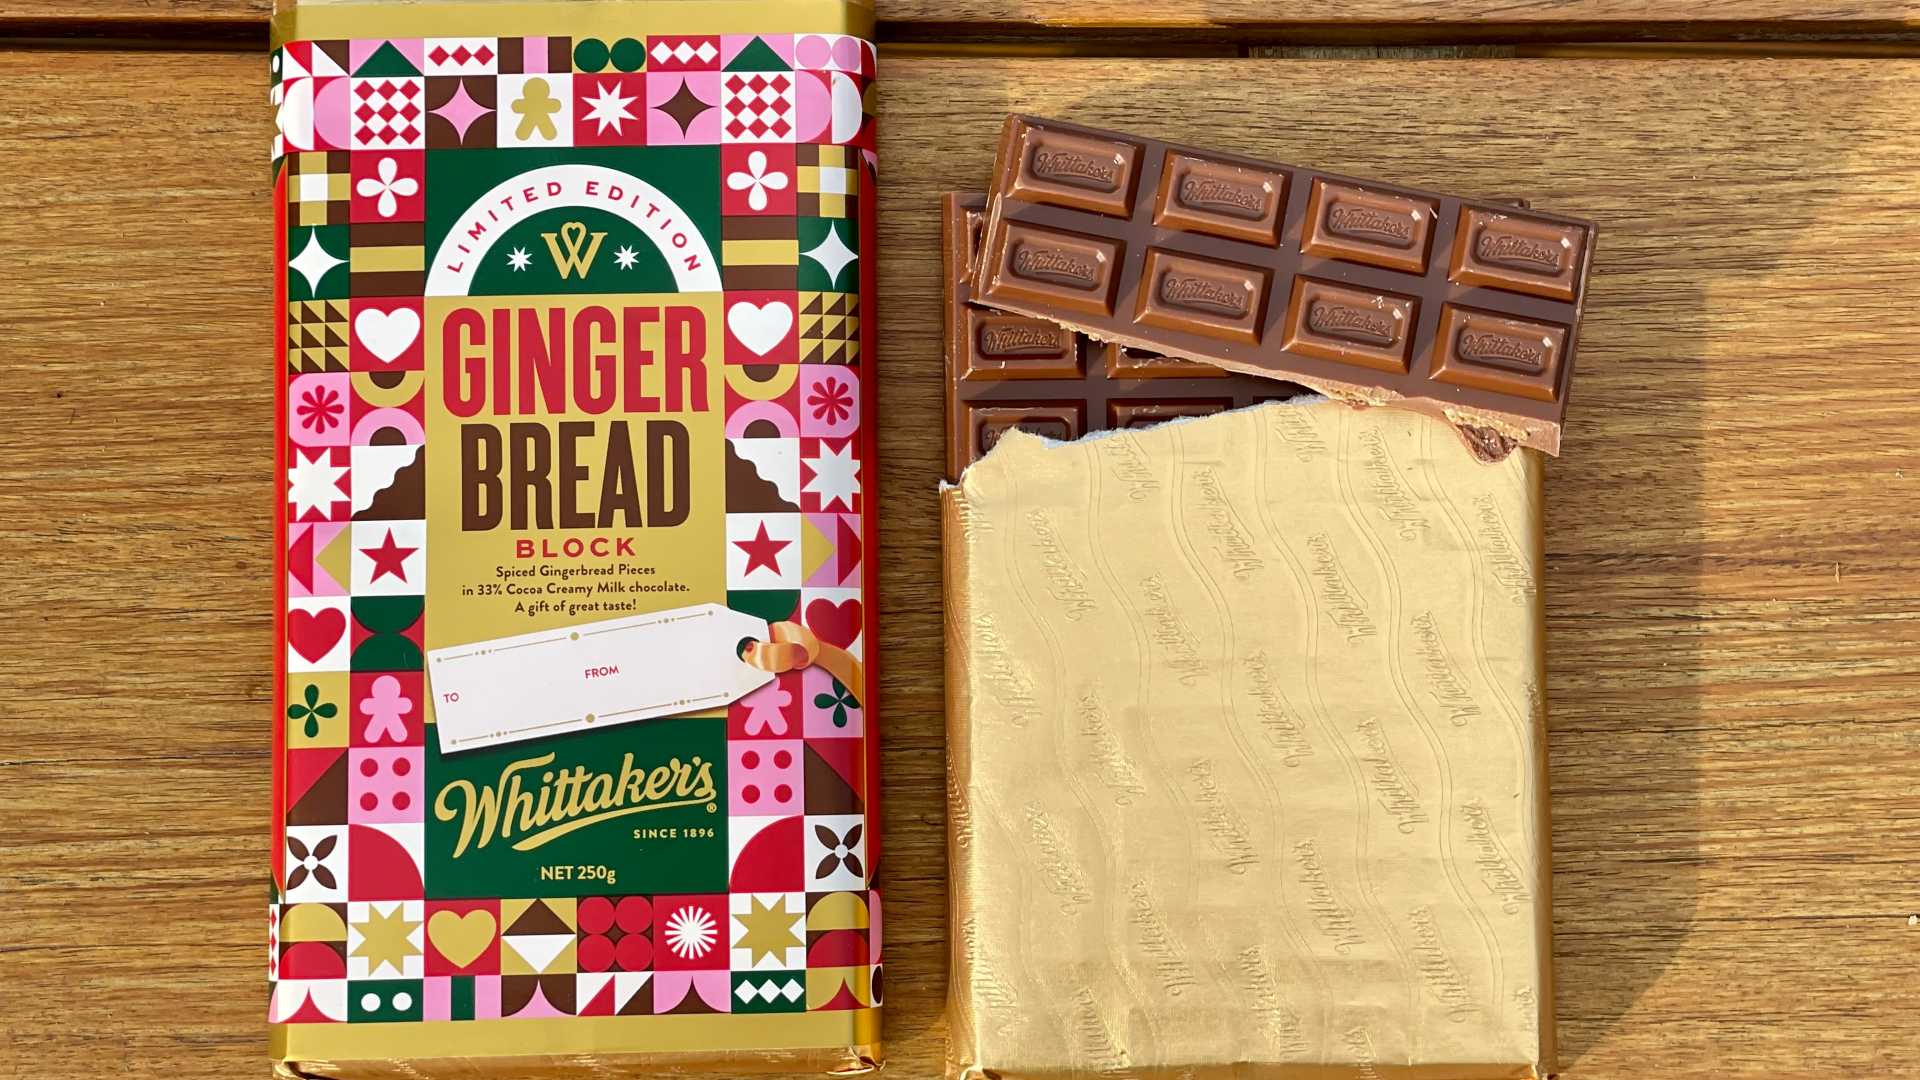 Whittaker's Is Releasing a Super Festive Limited-Edition Gingerbread Block for Christmas